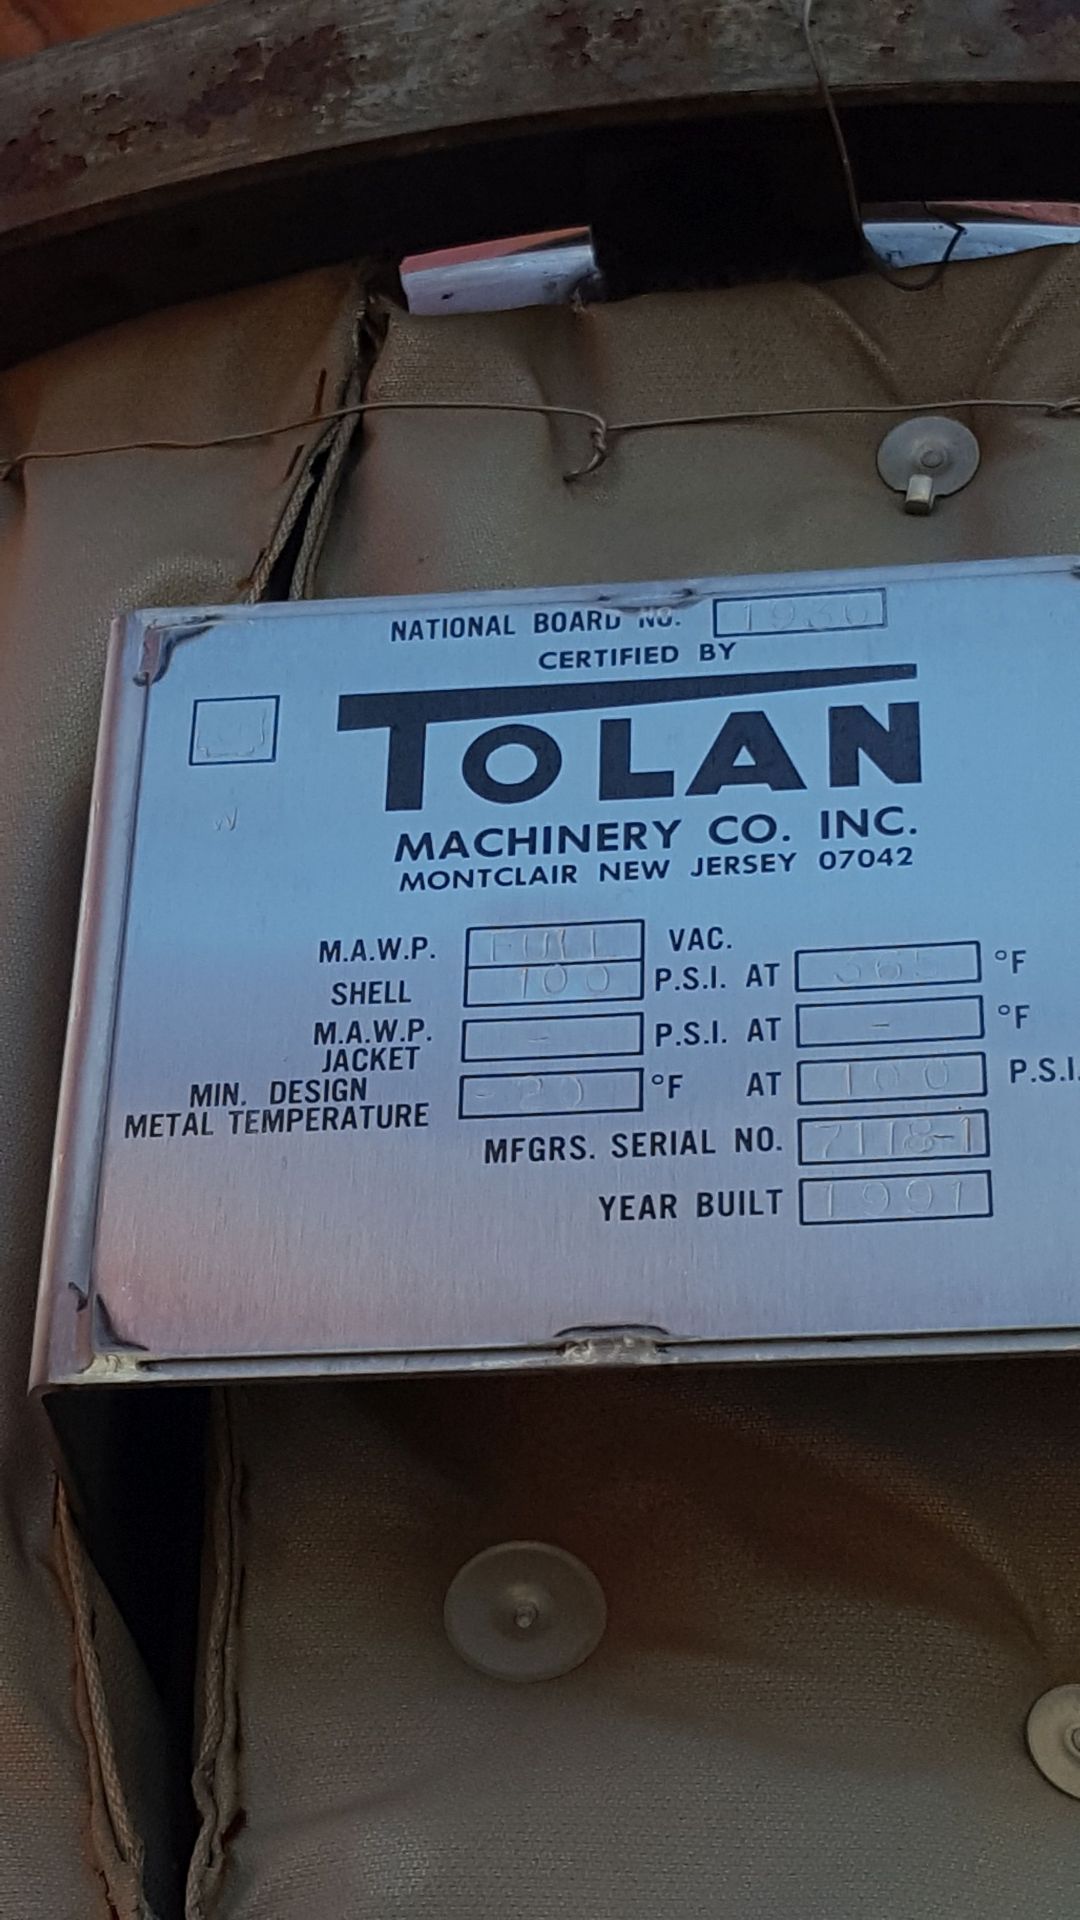 Tolan Machinery Stainless Steel Vessel 65" x 36" National Board 1936 - Image 4 of 7